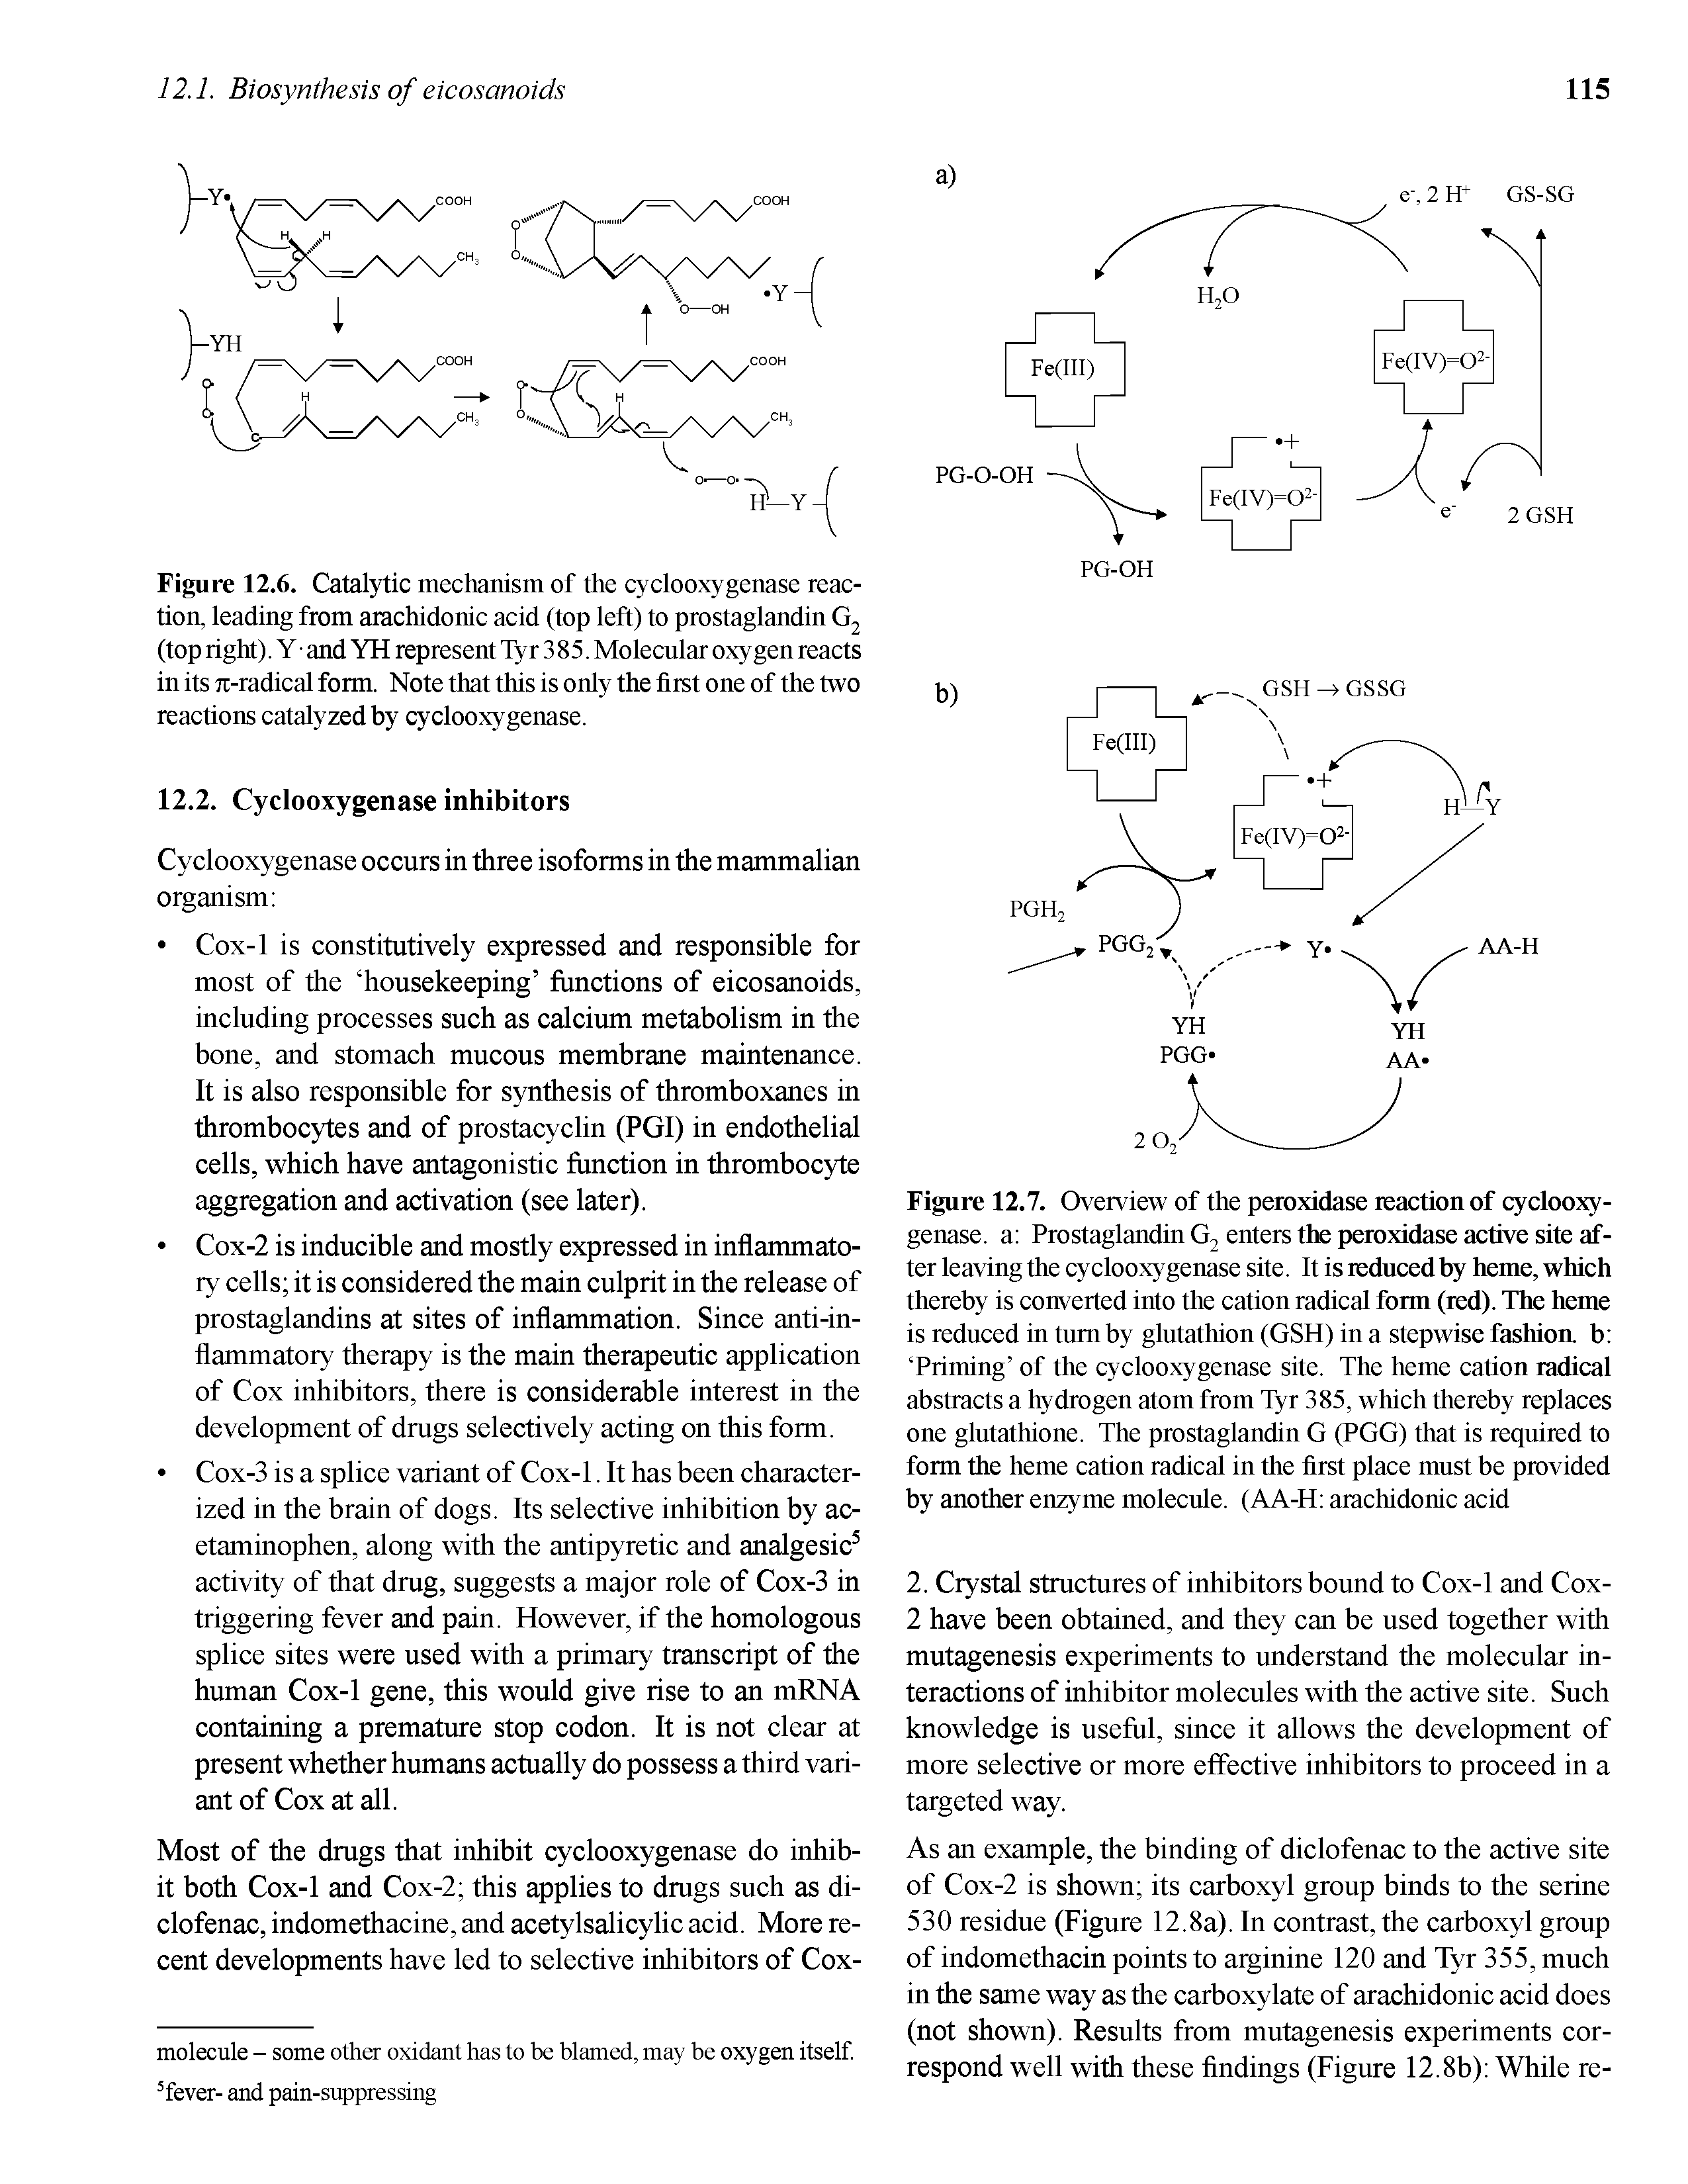 Figure 12.6. Catalytic mechanism of the cyclooxygenase reaction, leading from arachidonic acid (top left) to prostaglandin G2 (top right). Y and YH represent Tyr 3 85. Molecular oxygen reacts in its jT-radical form. Note that this is only the first one of the two reactions catalyzed by cyclooxygenase.